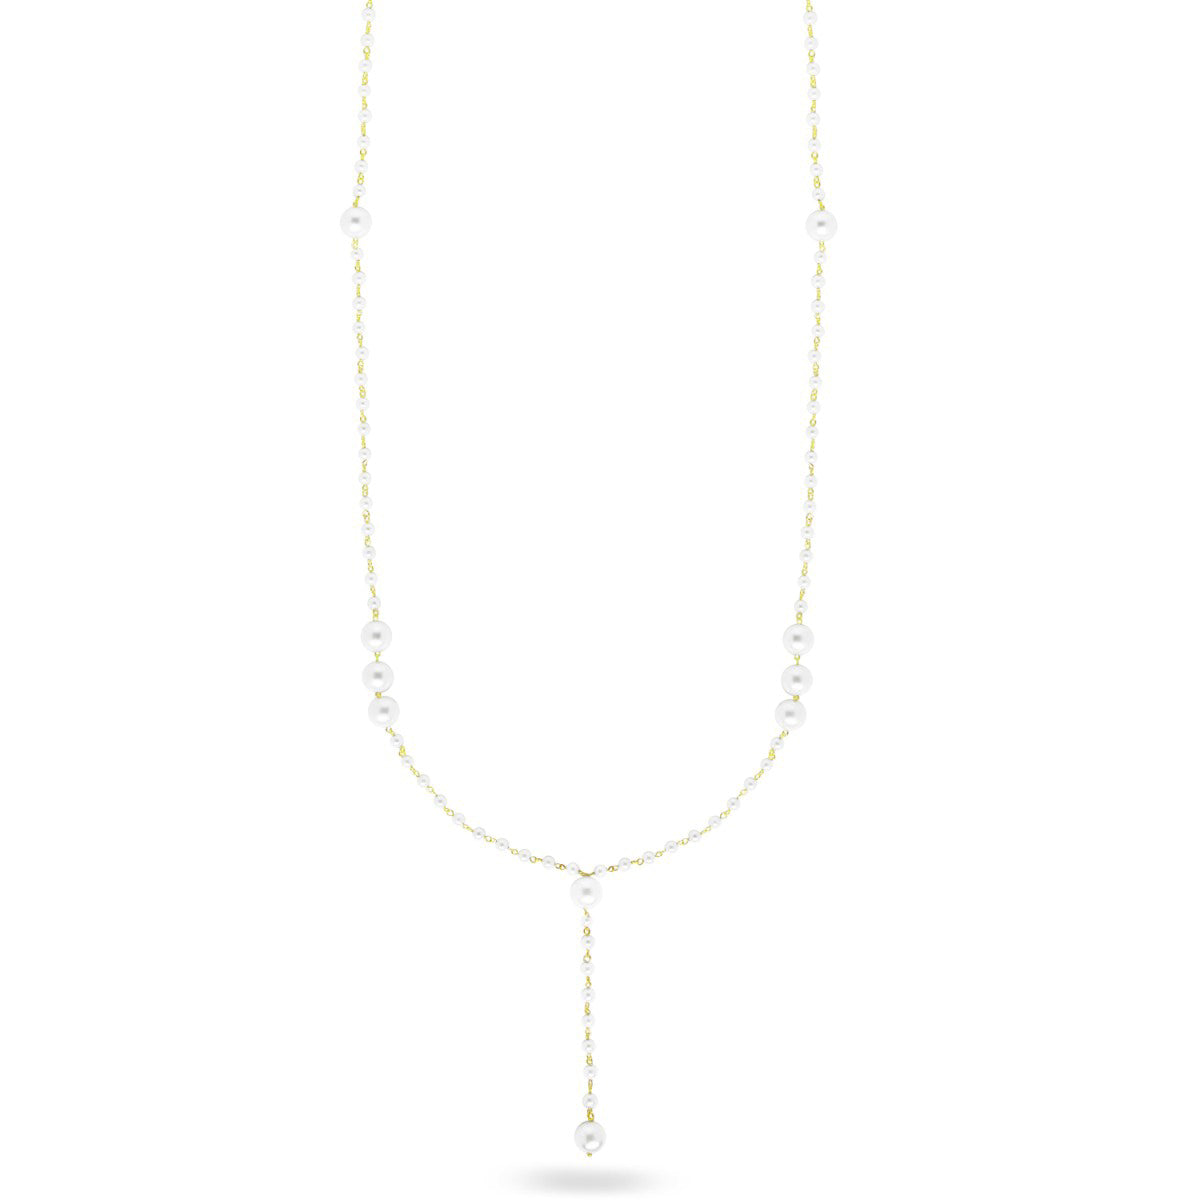 Necklaces - Long necklace neck-tie with pearls - WHITESIDE - 1 | Rue des Mille